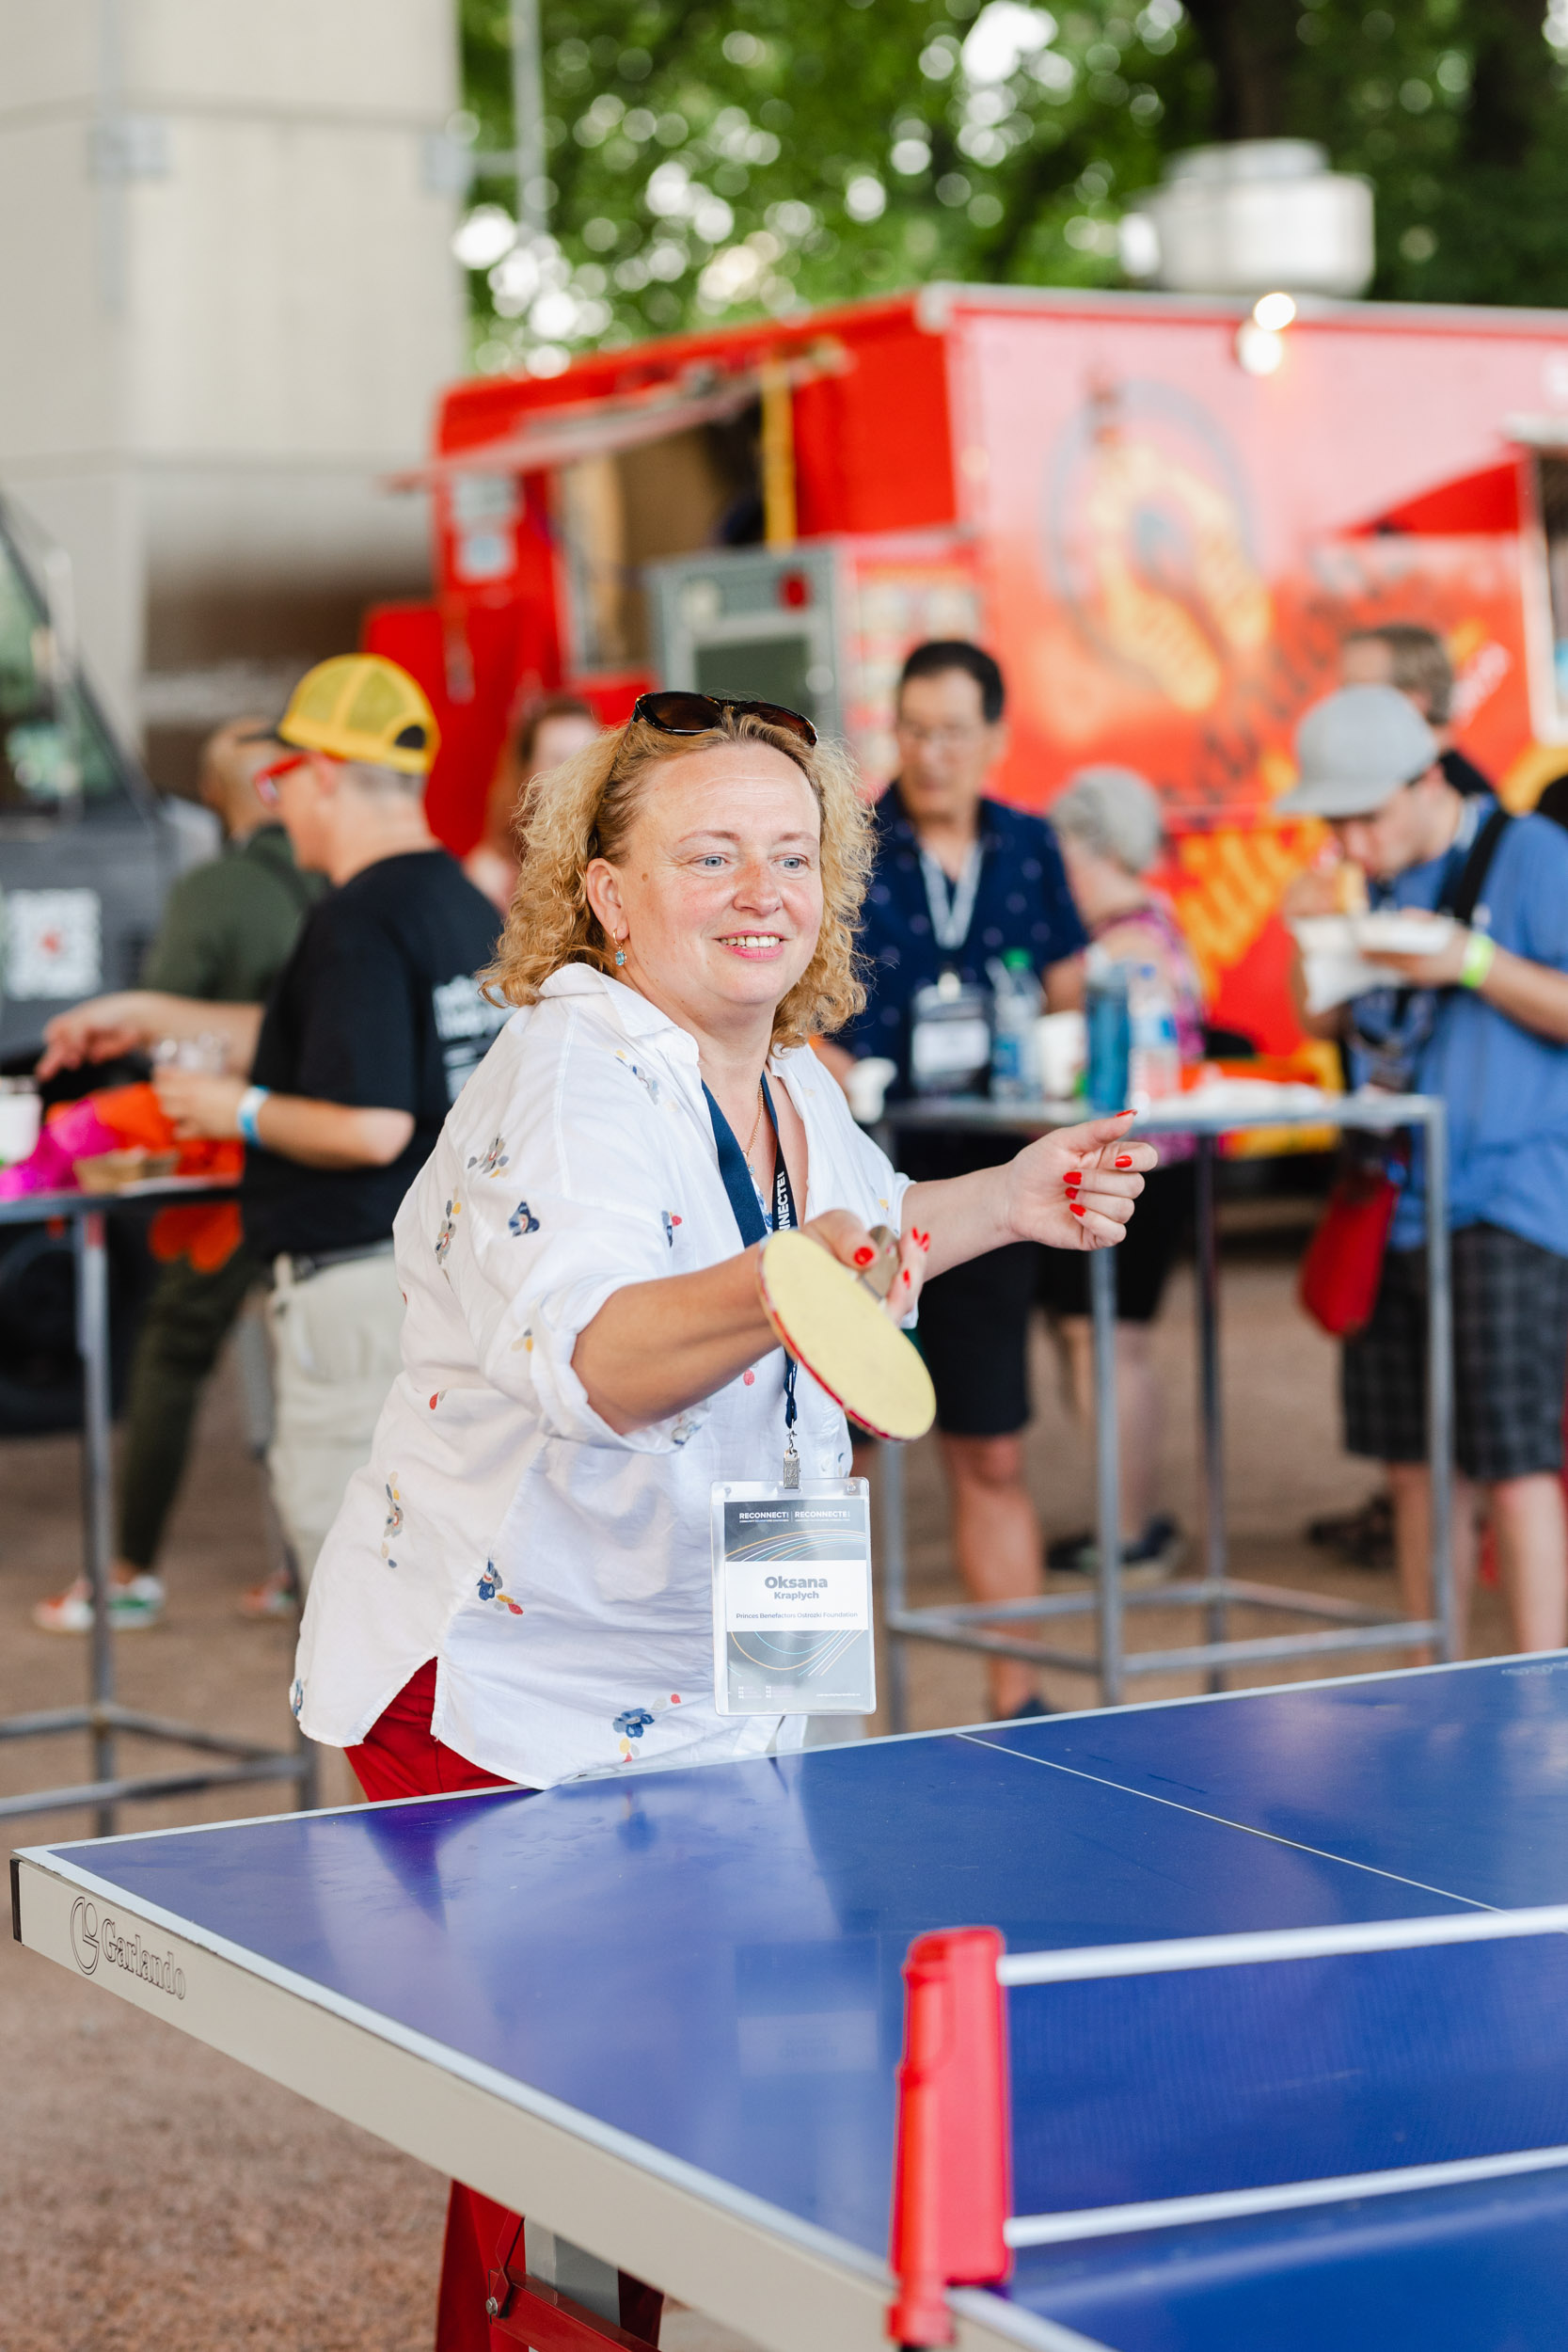 A woman participating in a conference ping pong match.